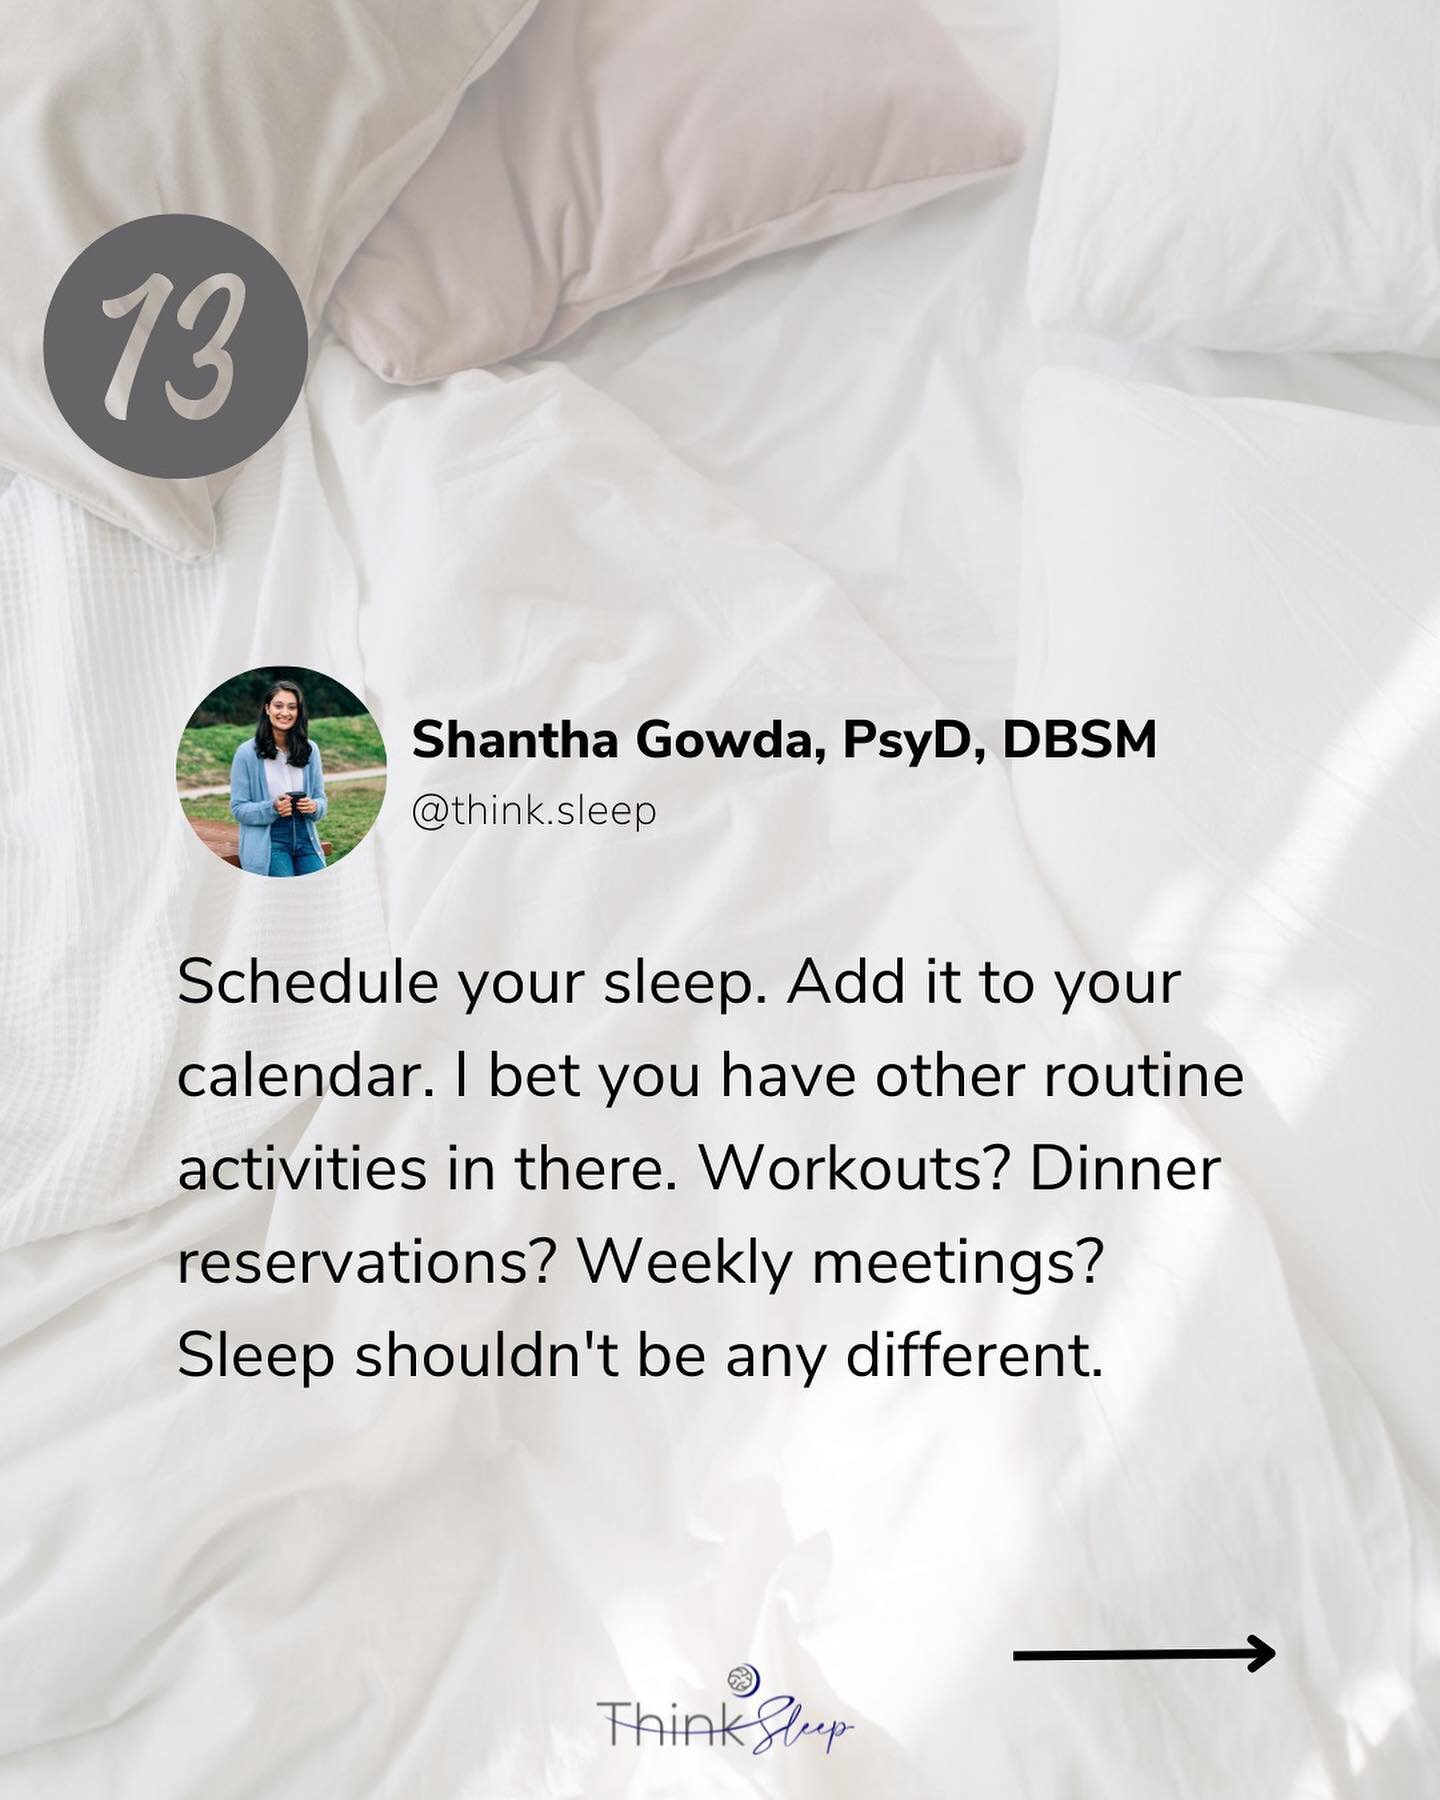 I love calendars. As a psychologist, time and punctuality are so valuable. I started scheduling my sleep a few years ago and LOVE it so much that it's the first thing I enter into my calendar. Here is what I've realized along the way:

1. I'm a bette